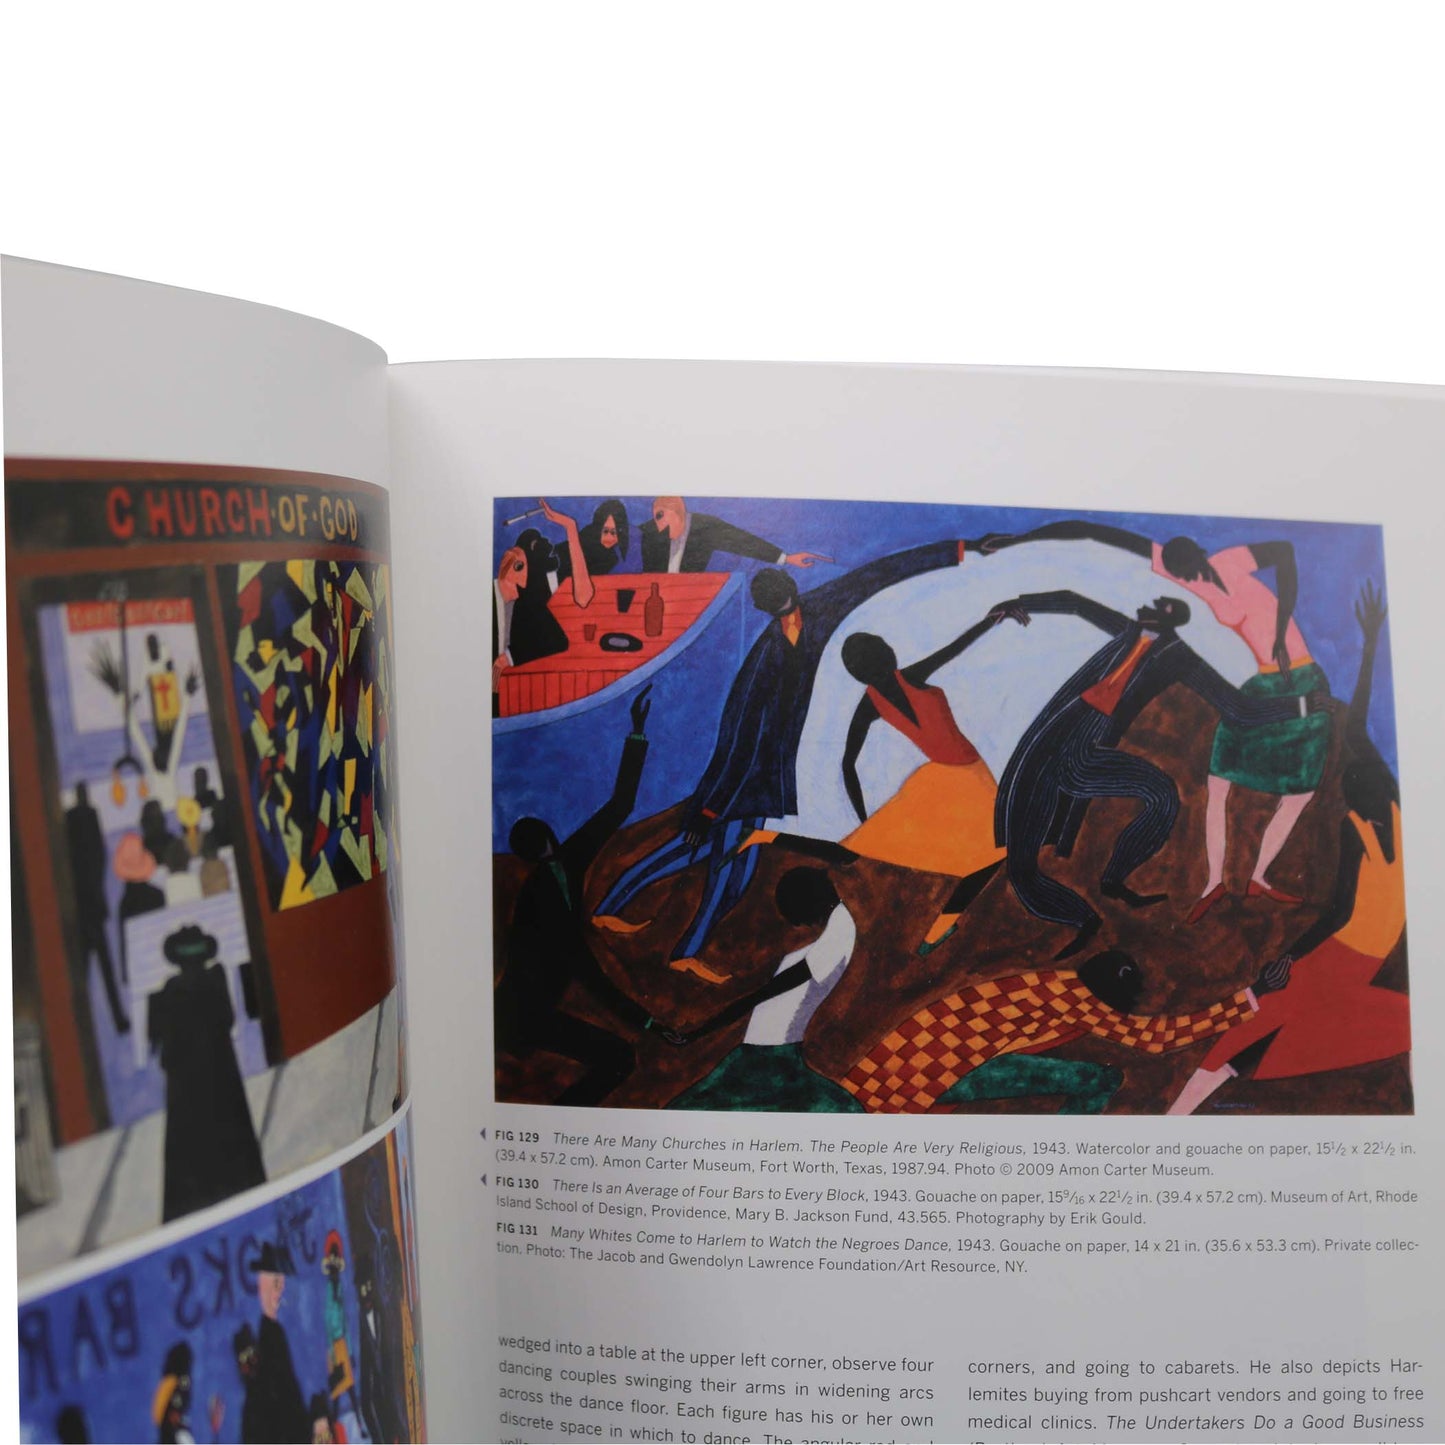 Painting Harlem Modern: The Art of Jacob Lawrence